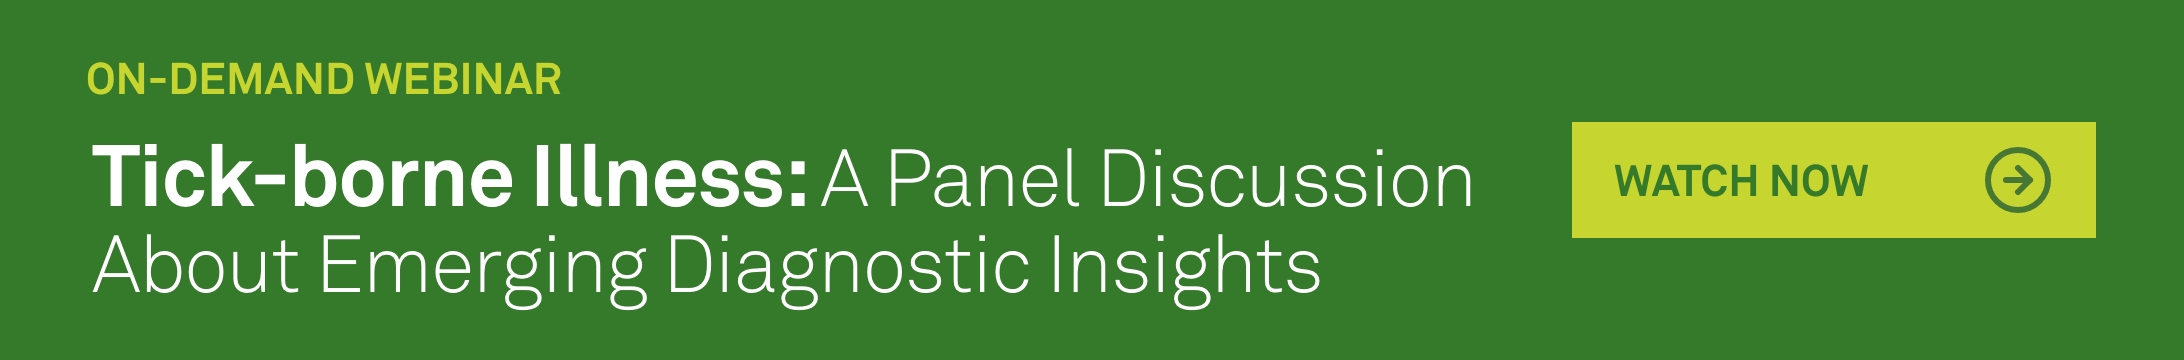 On-demand webinar: Tick-born Illness: A Panel Discussion About Emerging Diagnostic Insights